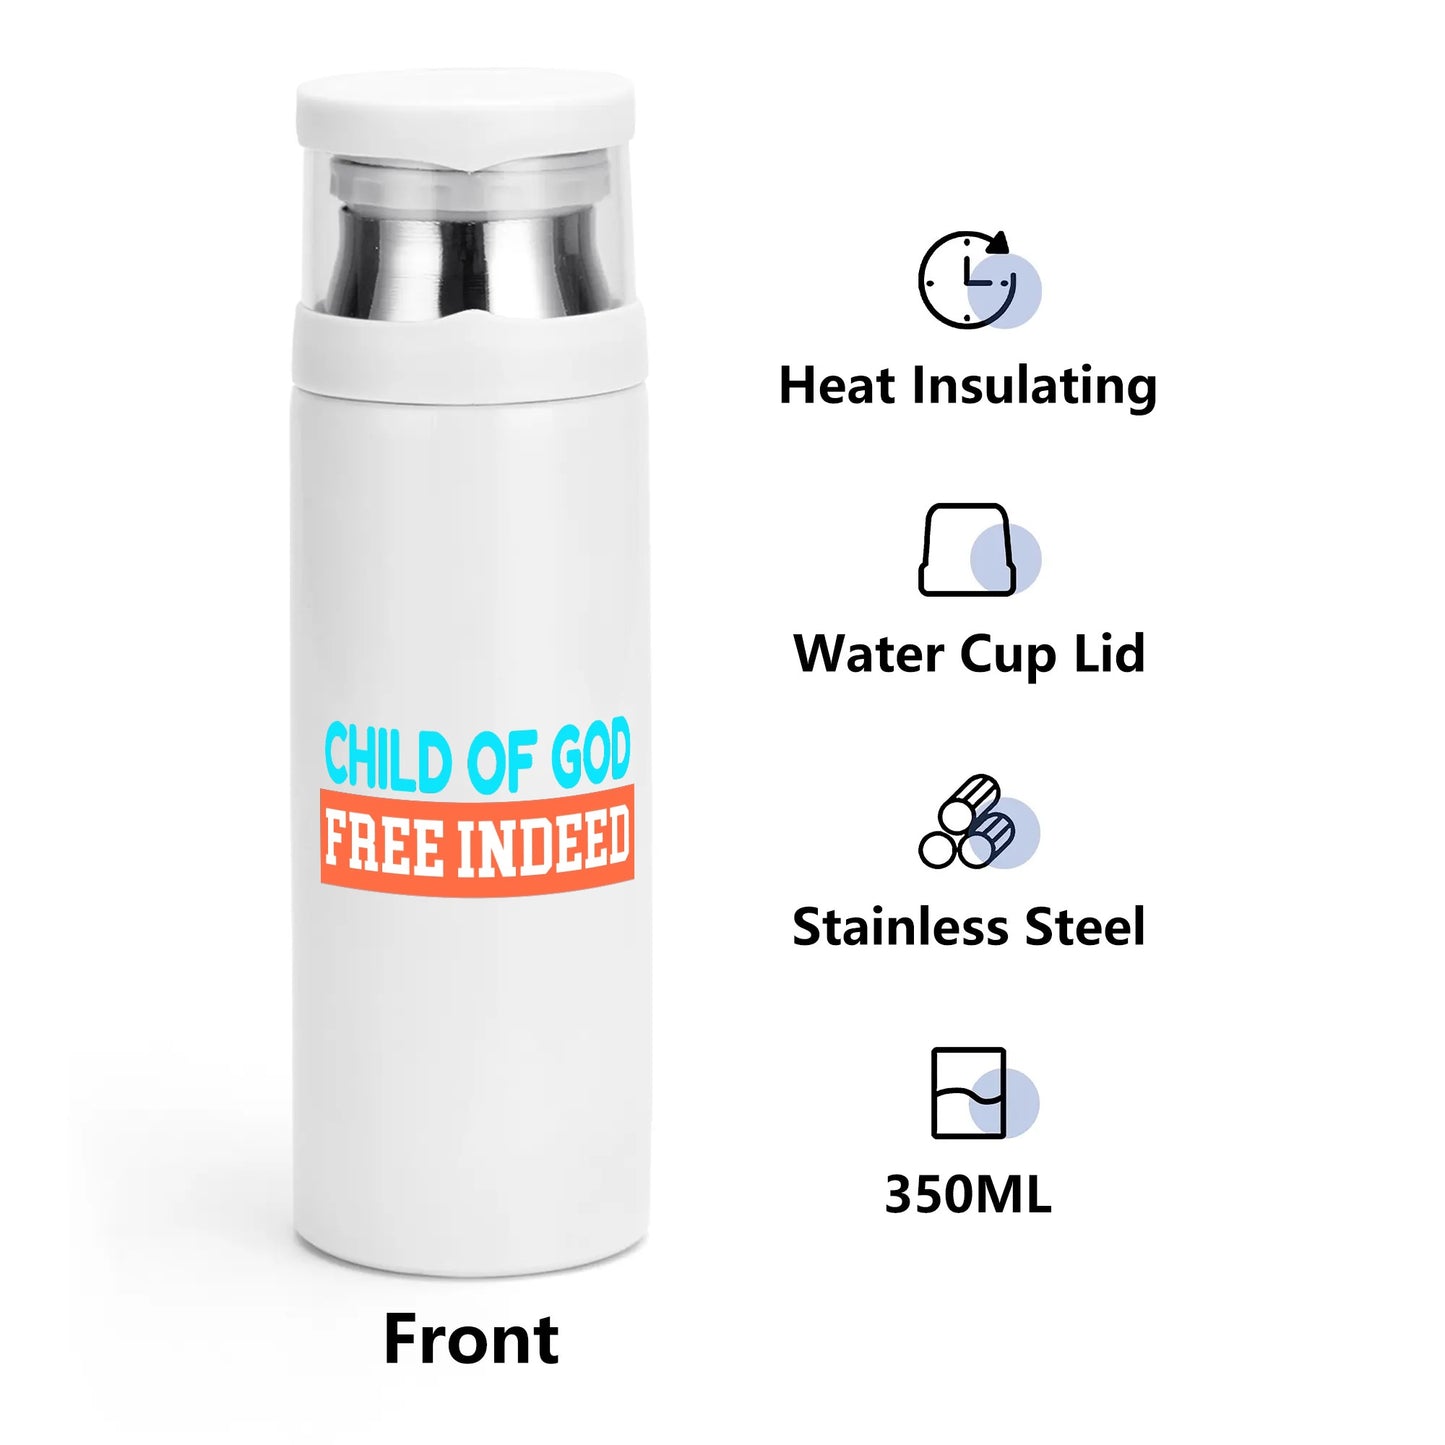 Child Of God Free Indeed Vacuum Bottle with Cup popcustoms